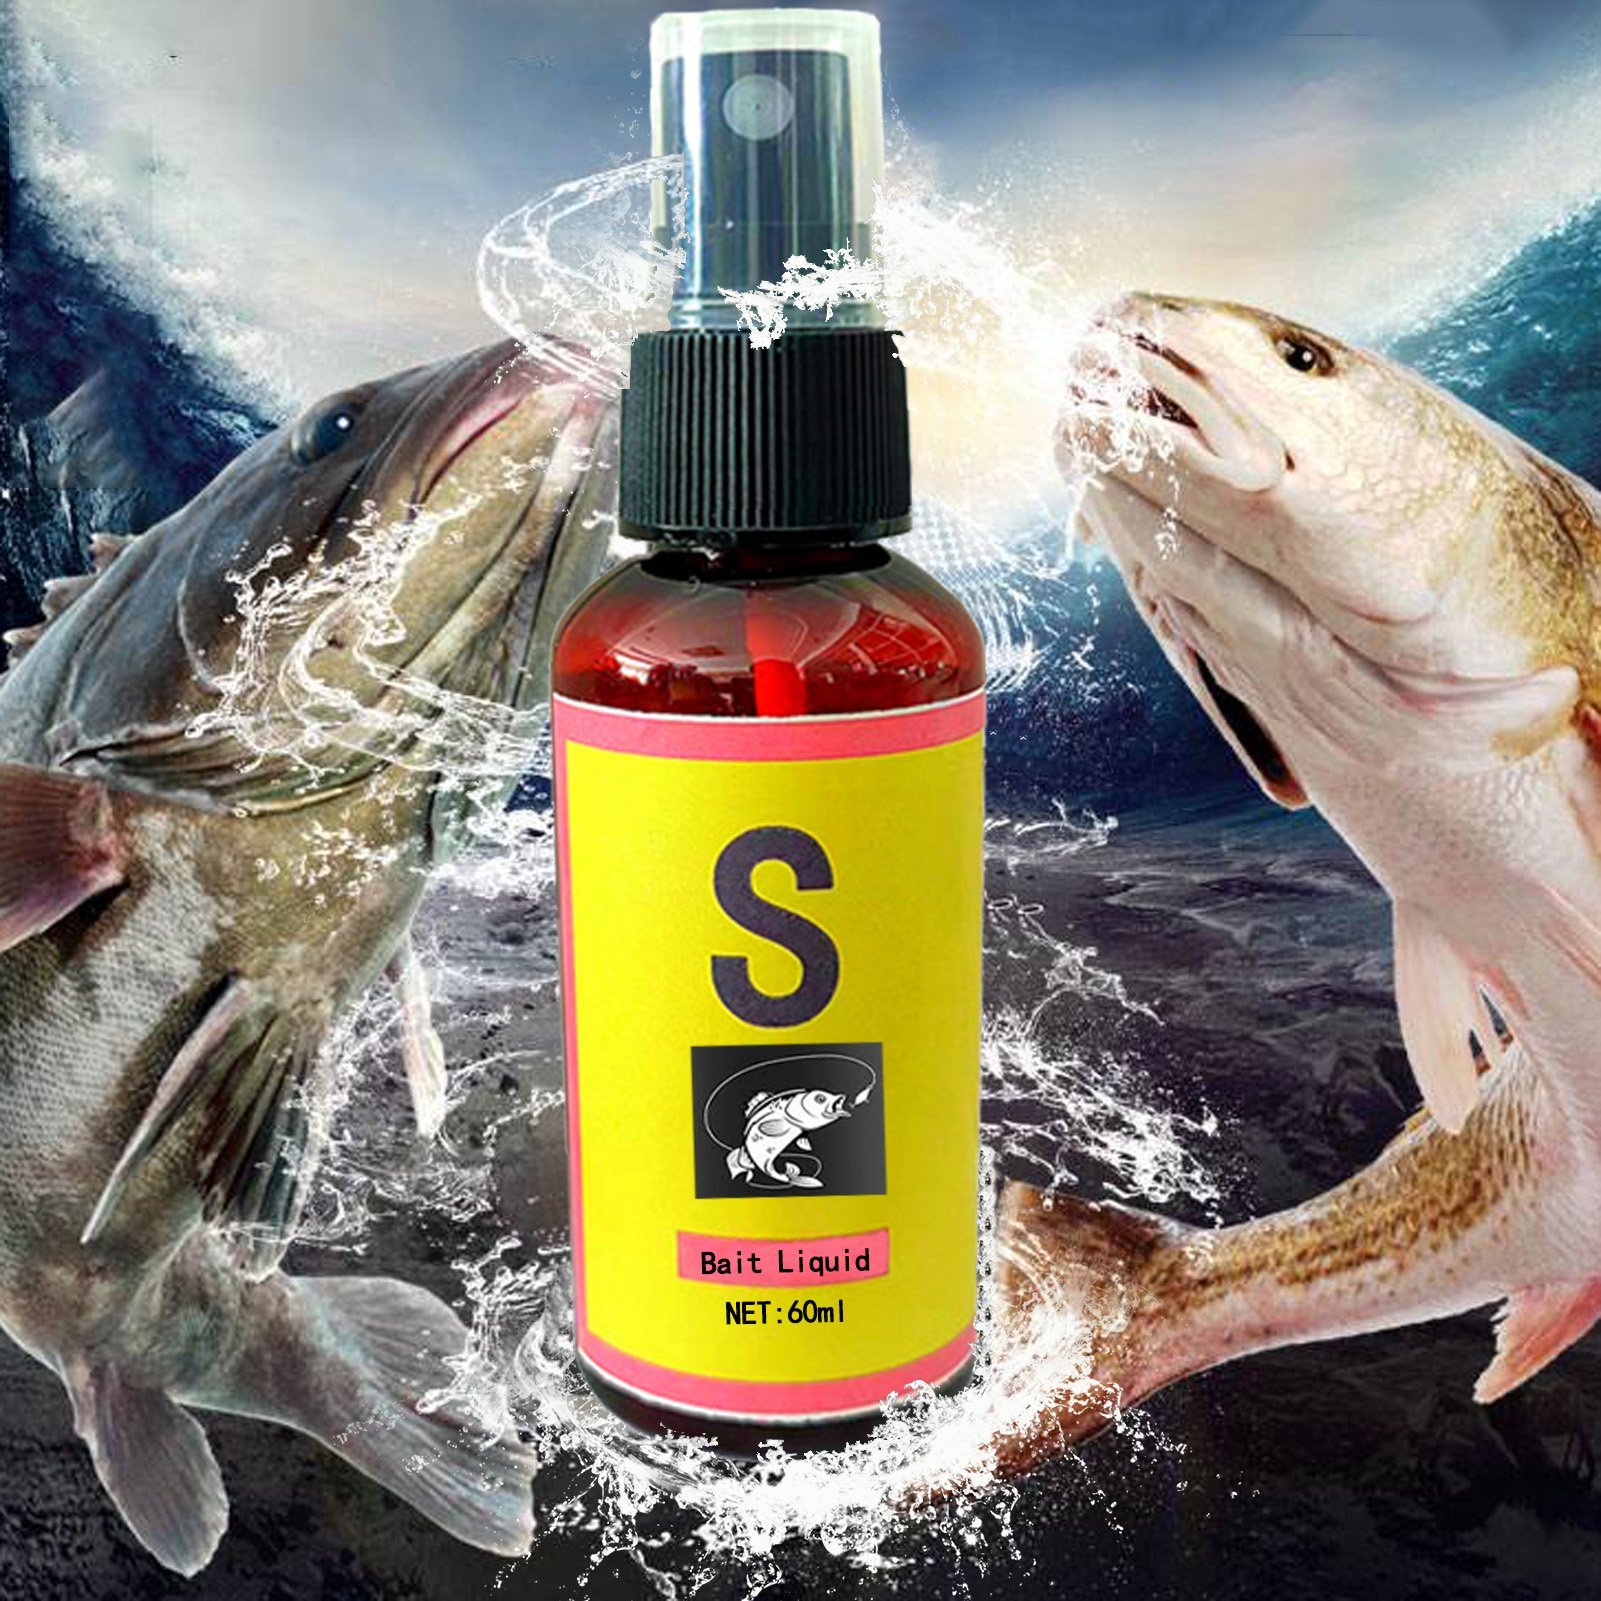 🔥🔥2023 New Natural bait Scent Fish Attractants for Baits - For all types